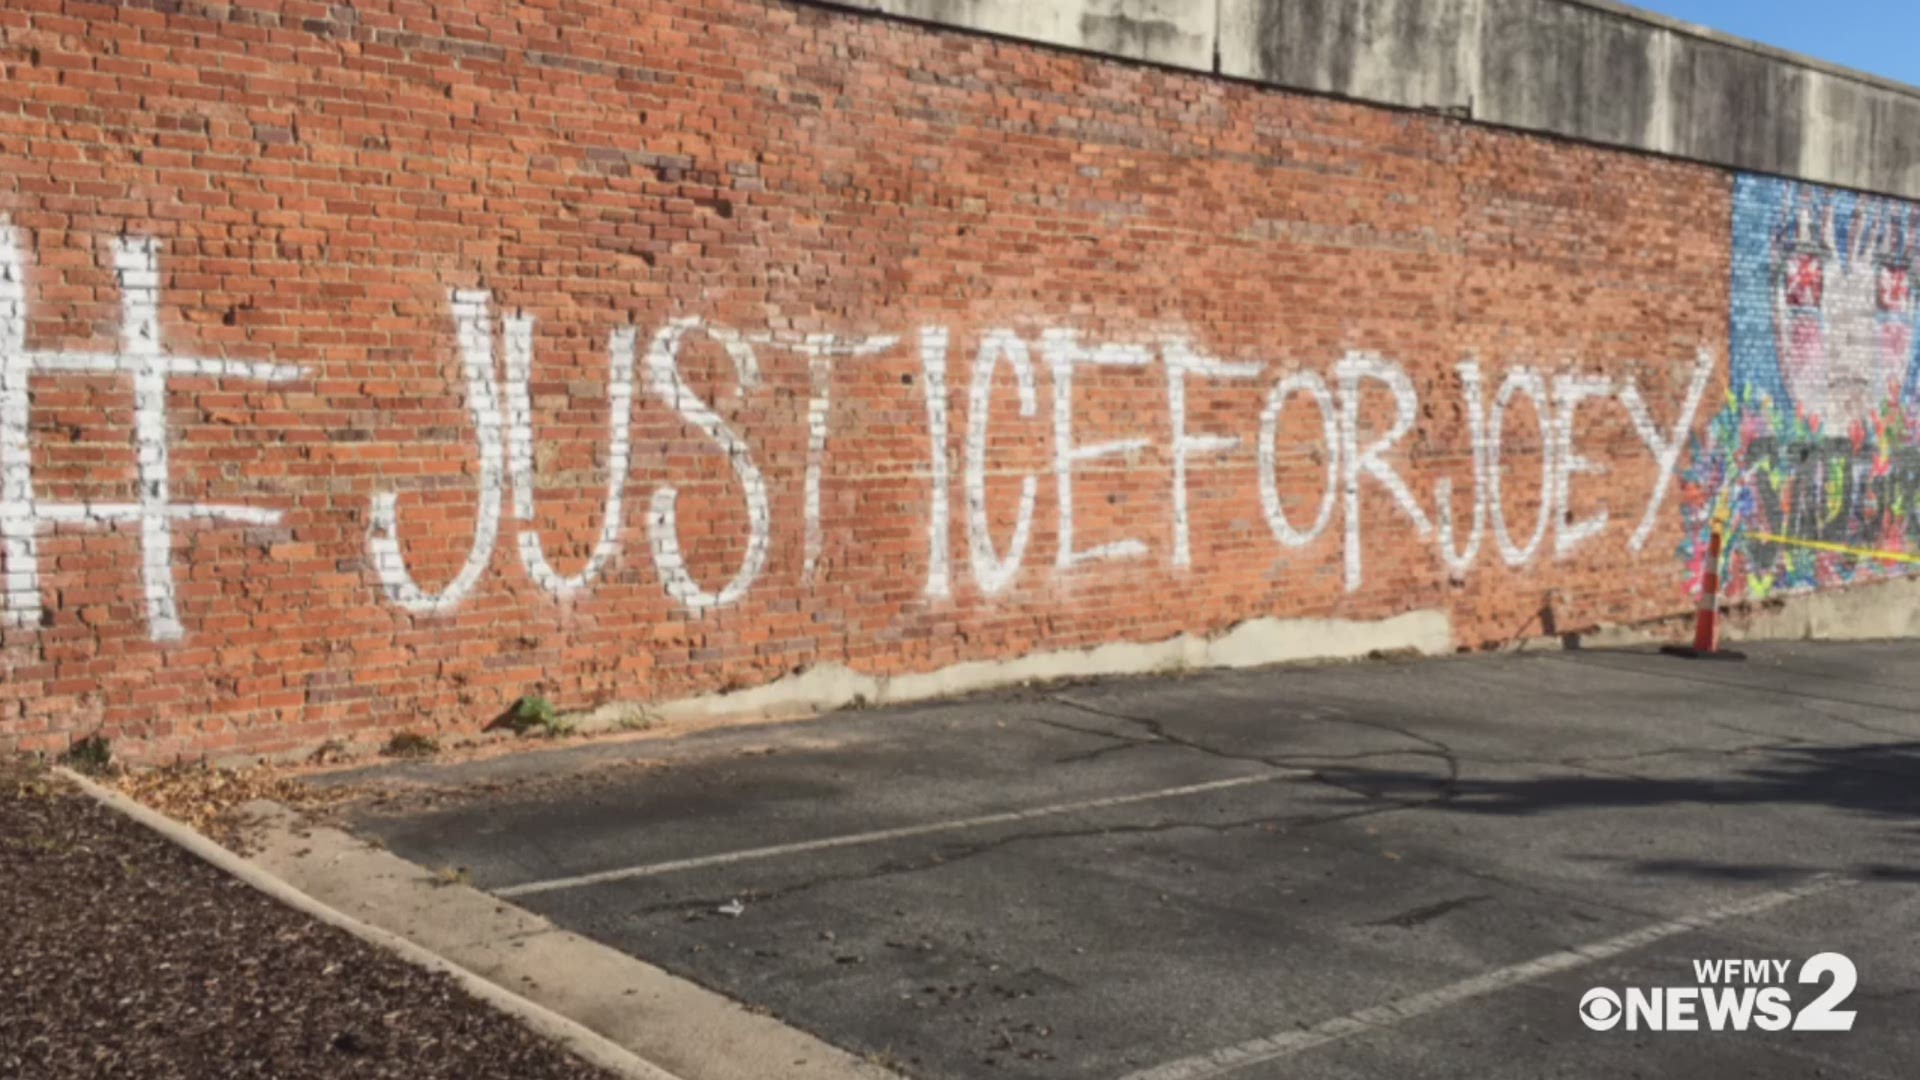 The City of Greensboro has told building owner Marty Kotis the #JusticeForJoey graffiti violates code and needs to be buffed.